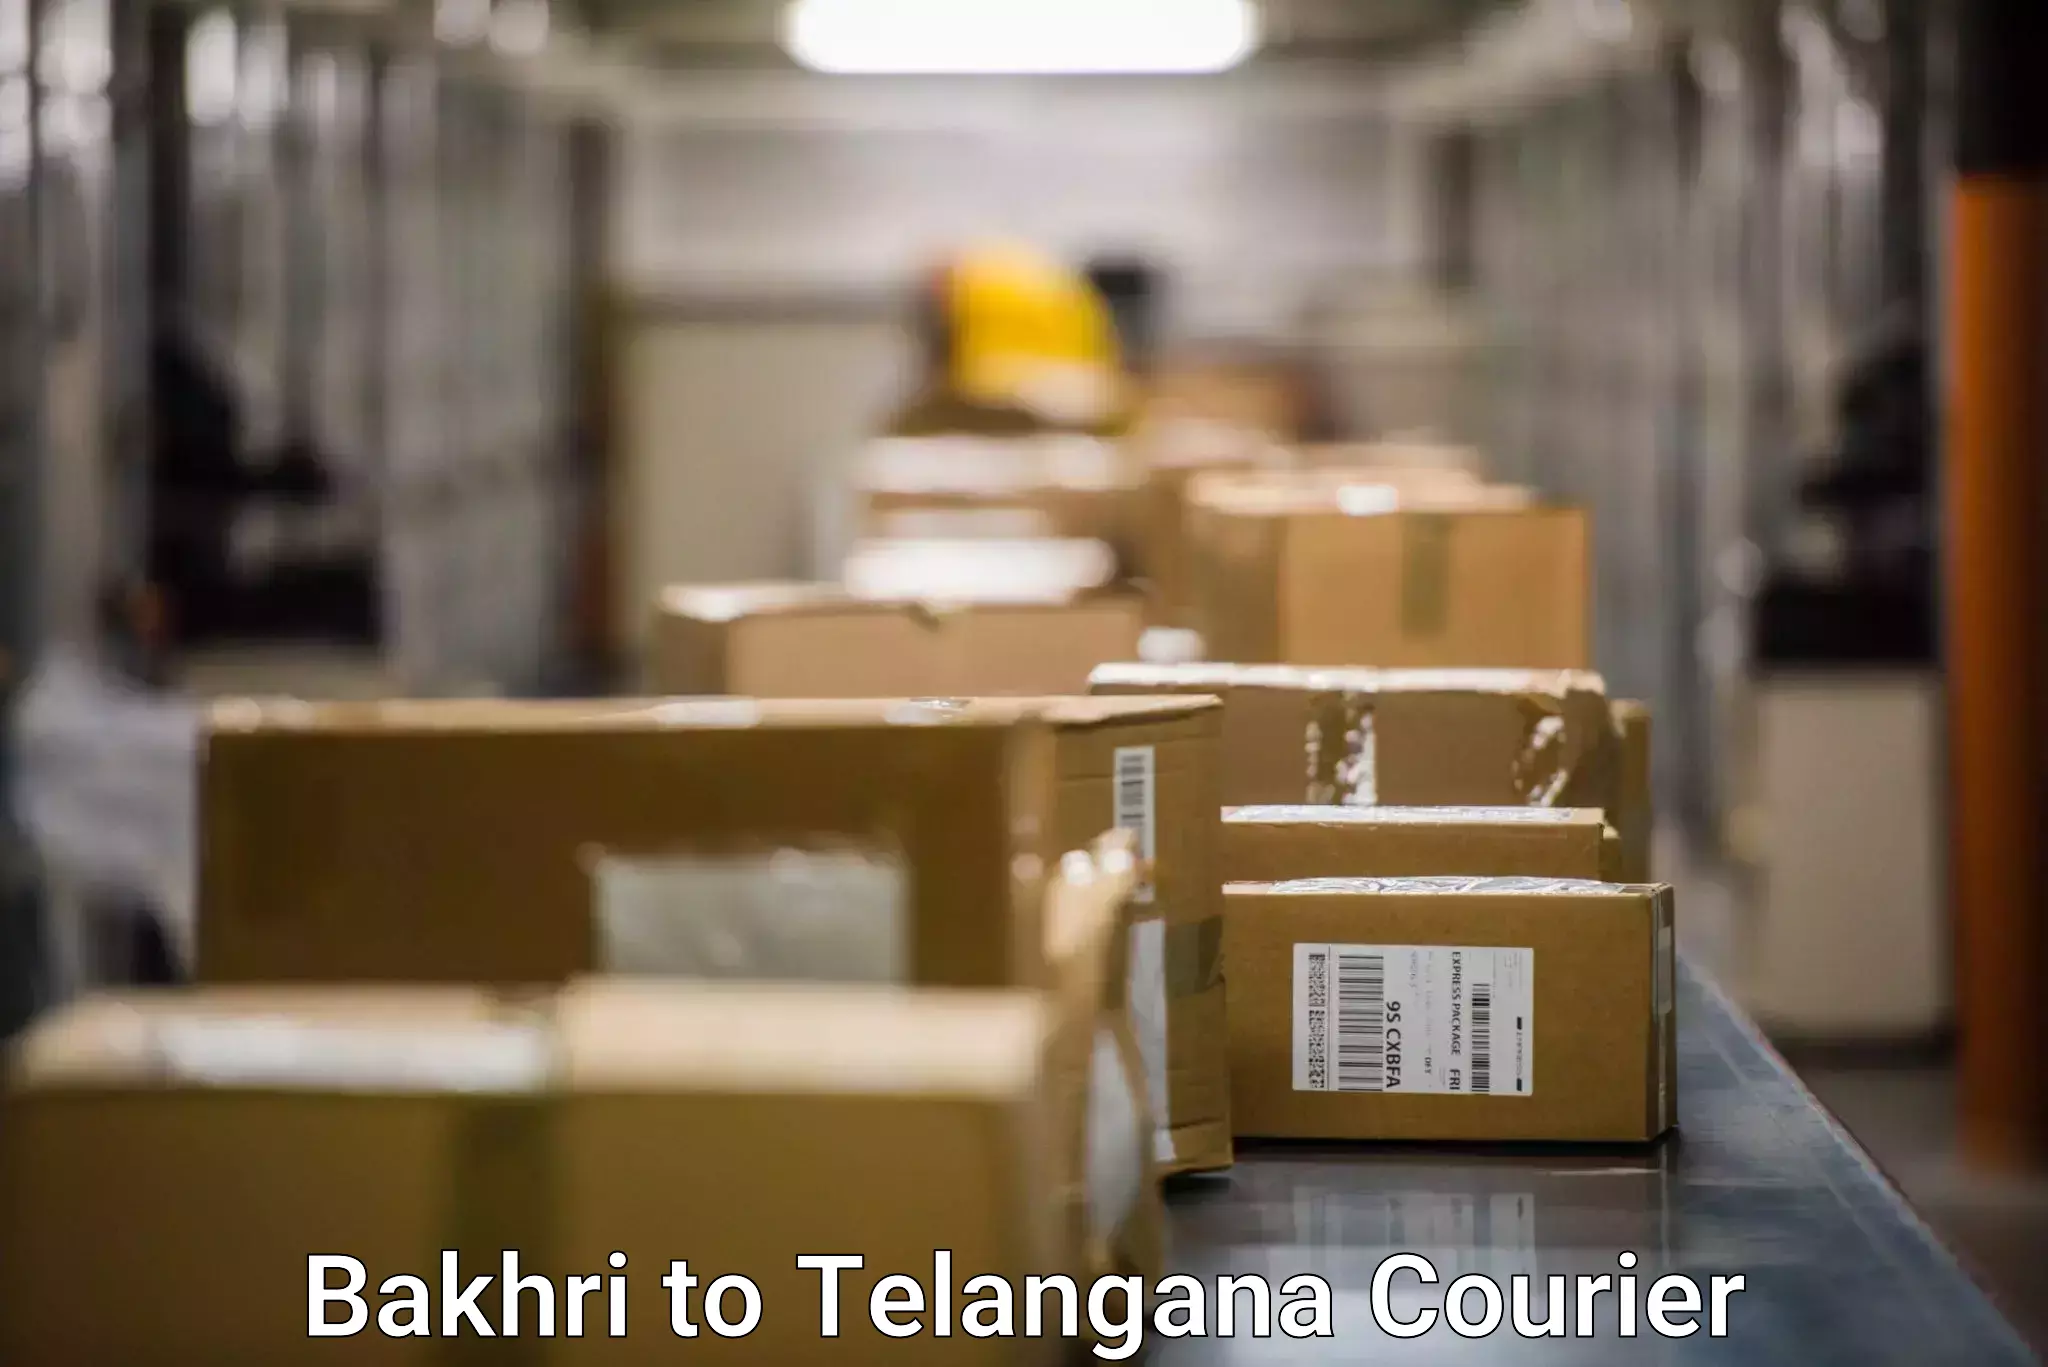 Courier app Bakhri to Sultanabad